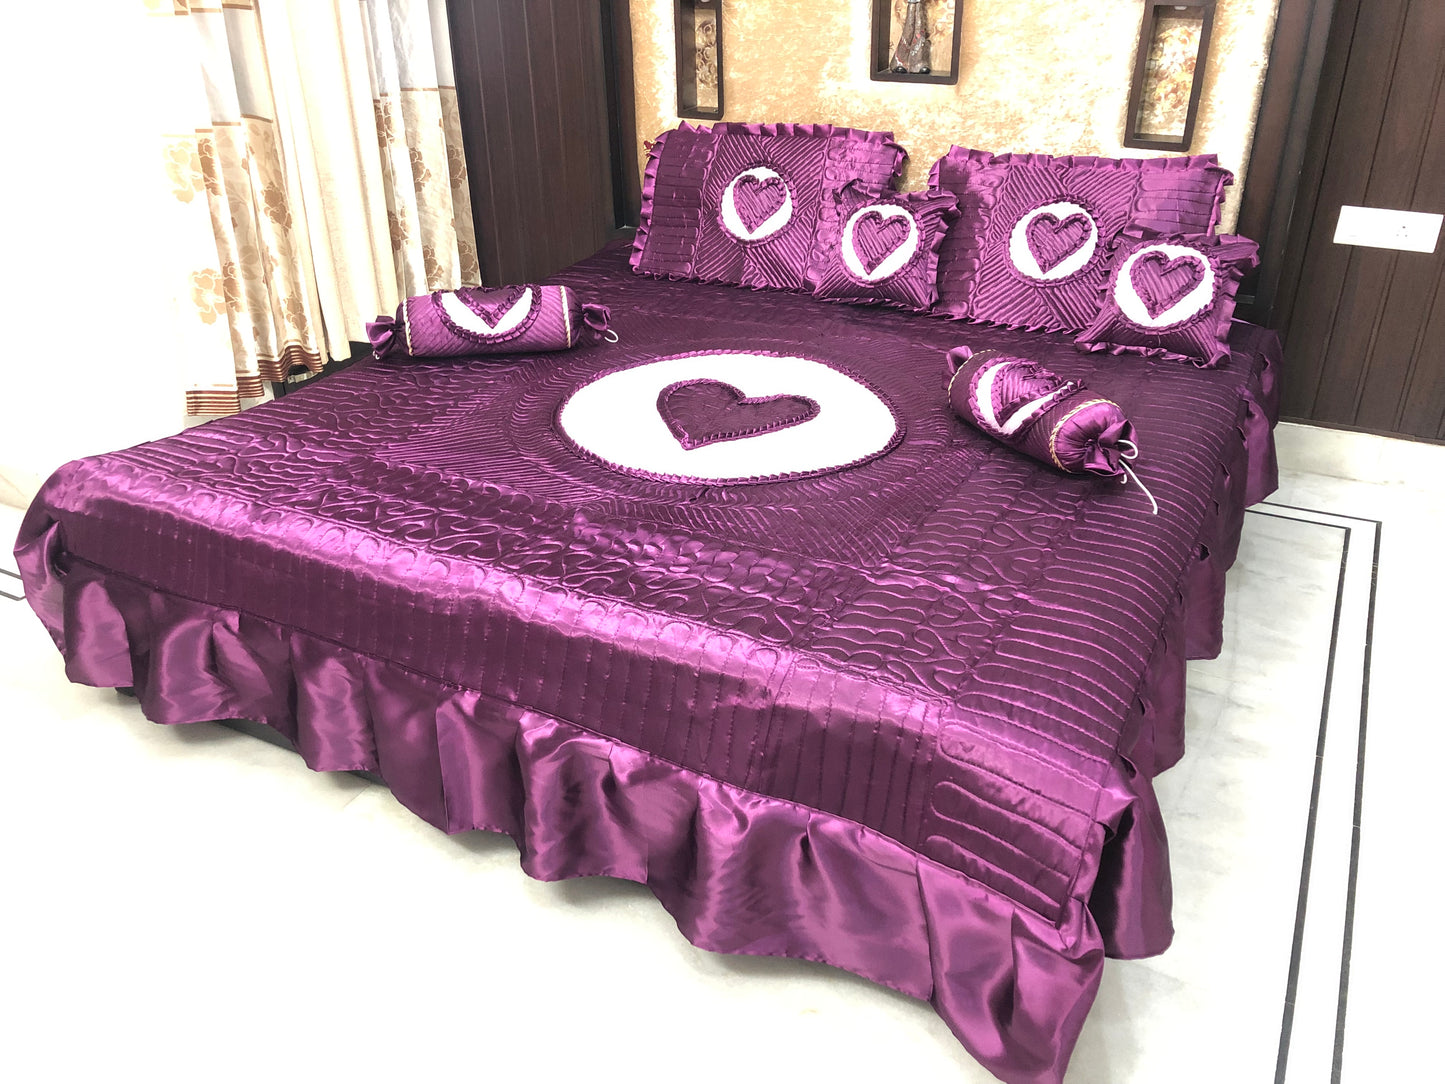 loomsmith-satin-bedsheet-set-of-7-heart-design-in-wine-color-two-filled-cushions-two-filled-bolsters-King-Size-set-two-pillow-covers